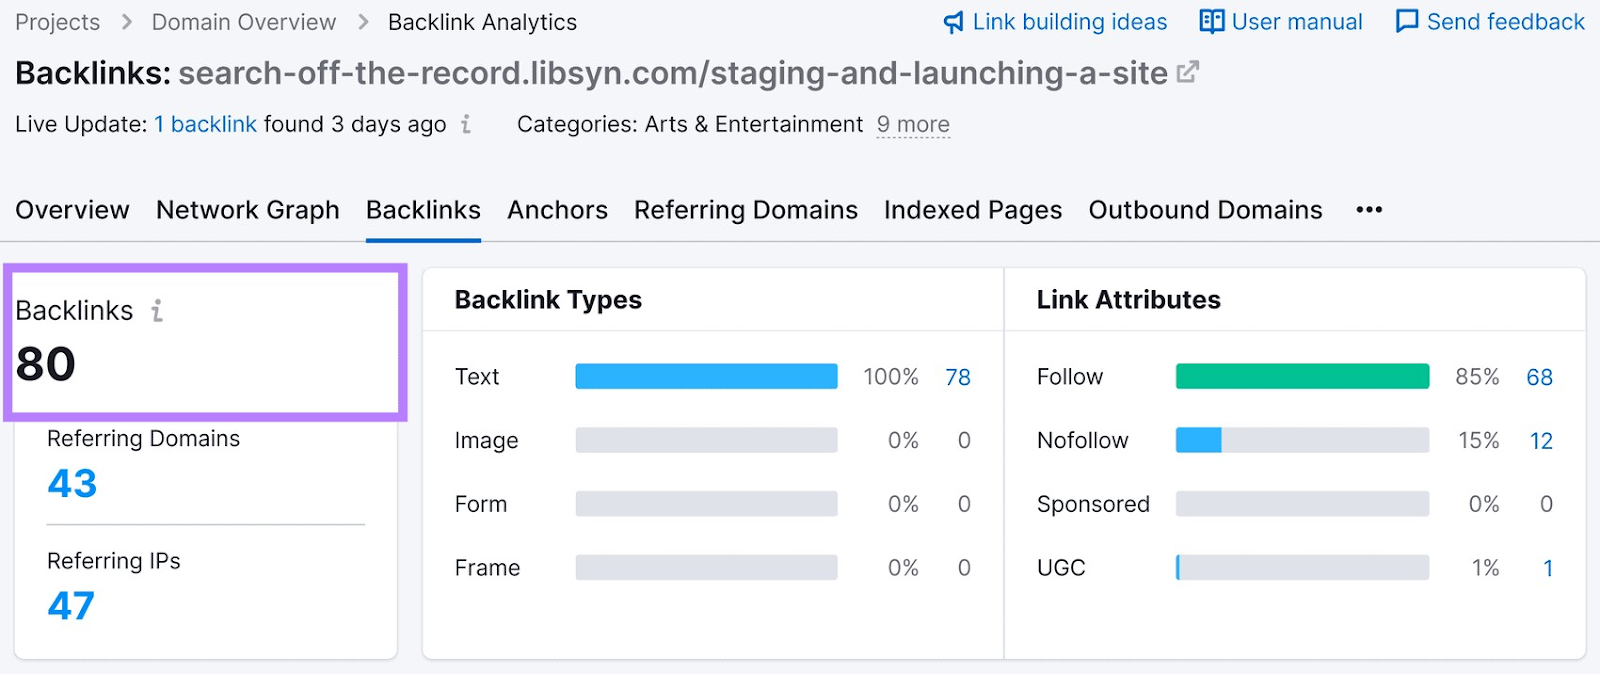 Backlink Analytics tool shows 80 backlinks for the Google’s podcast episode on staging and launching a new site